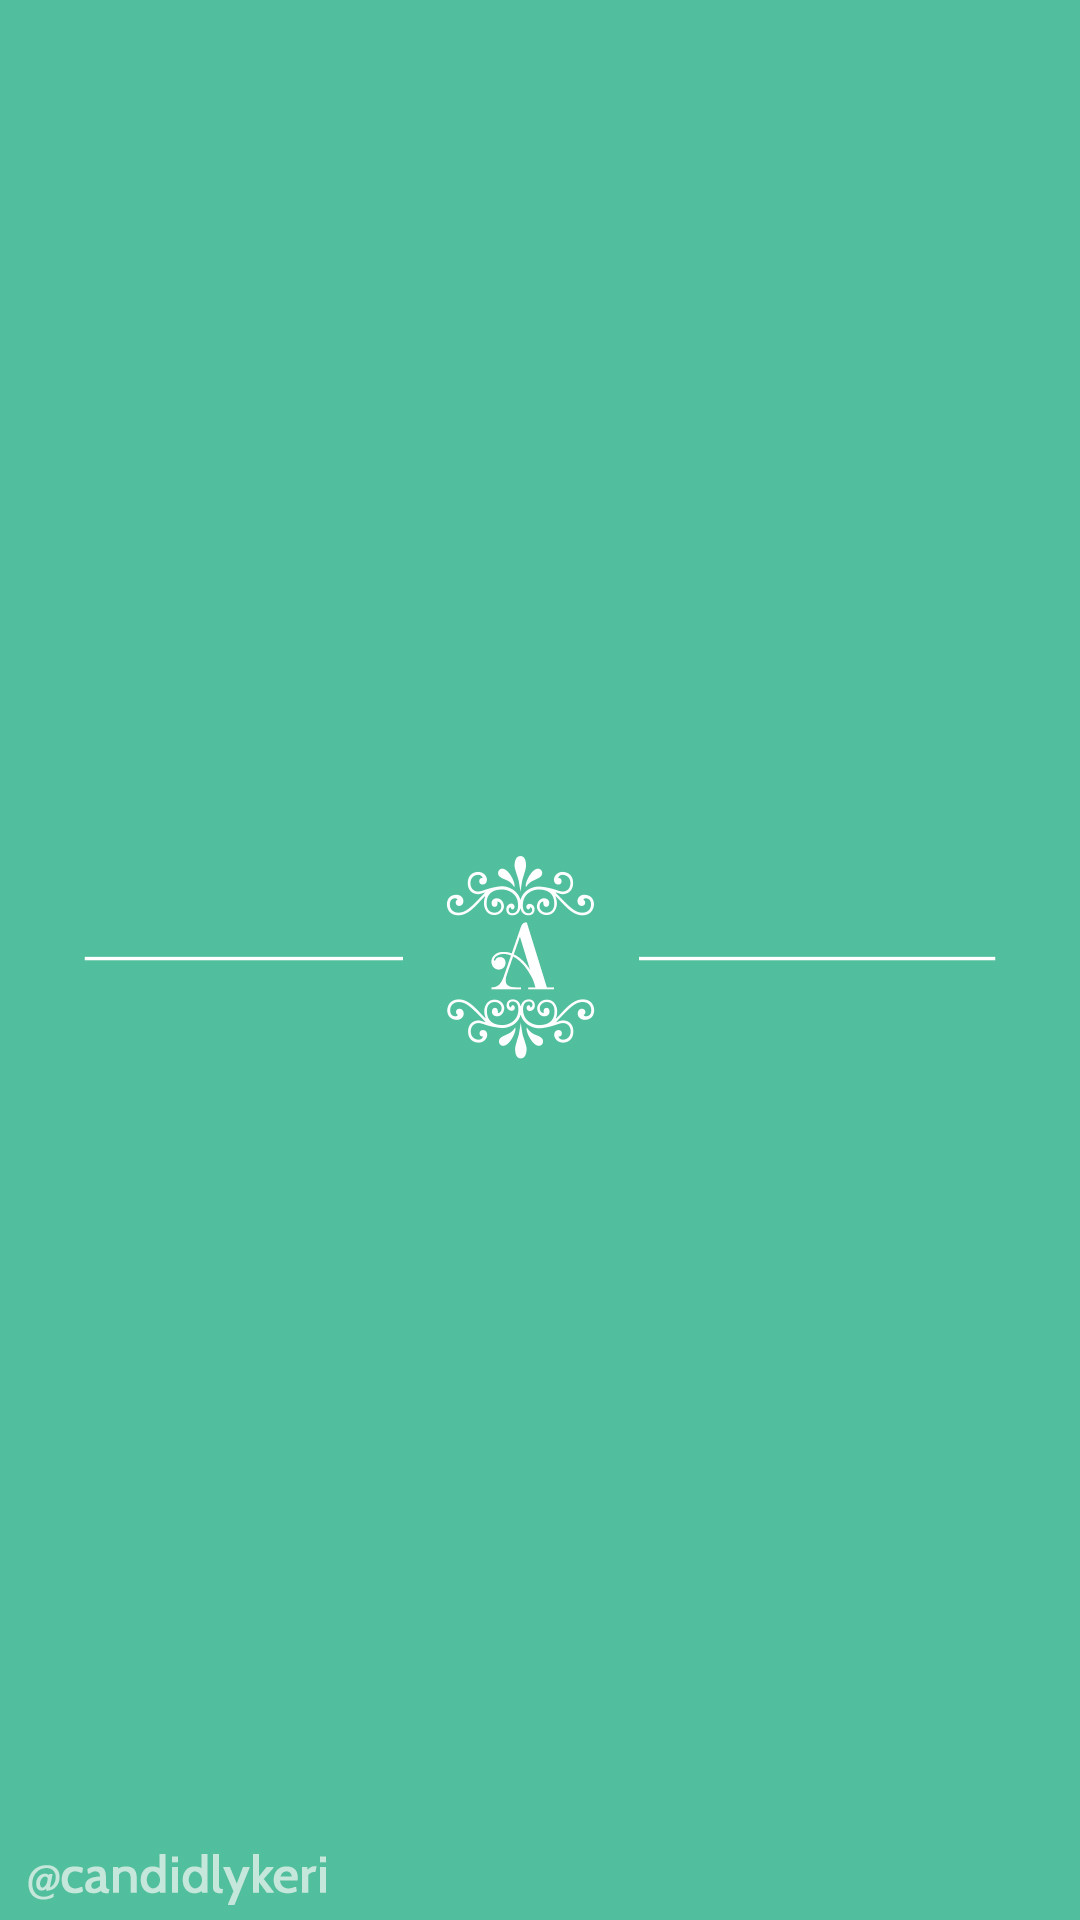 1080x1920 April 2016 Wallpaper Free Download for mobile, iphone and android, A  Monogram with mint